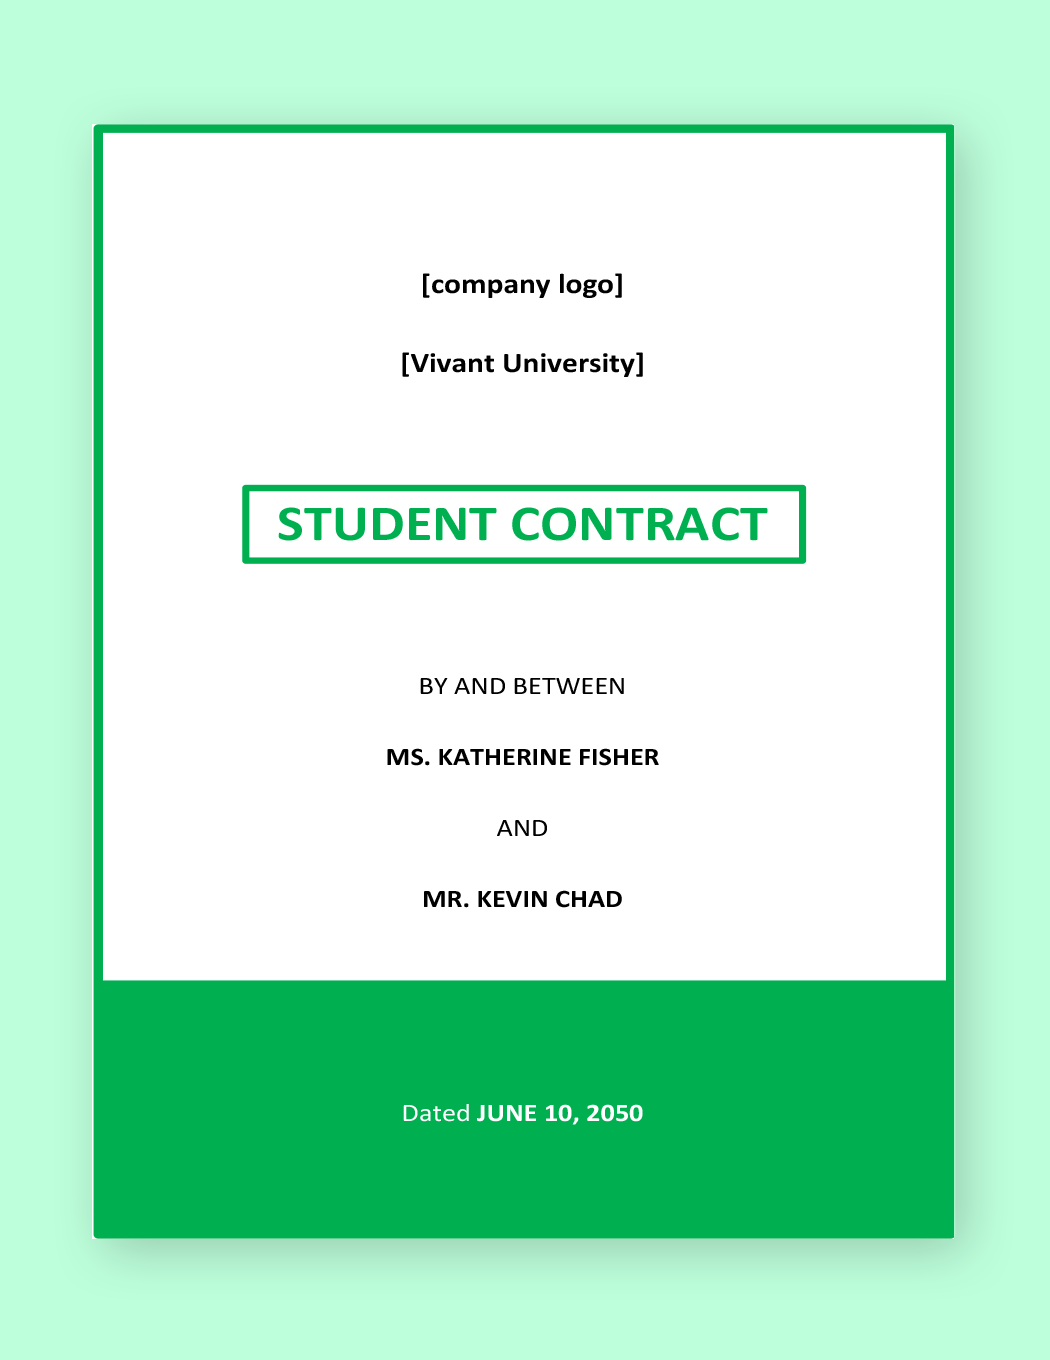 Student Contract Example